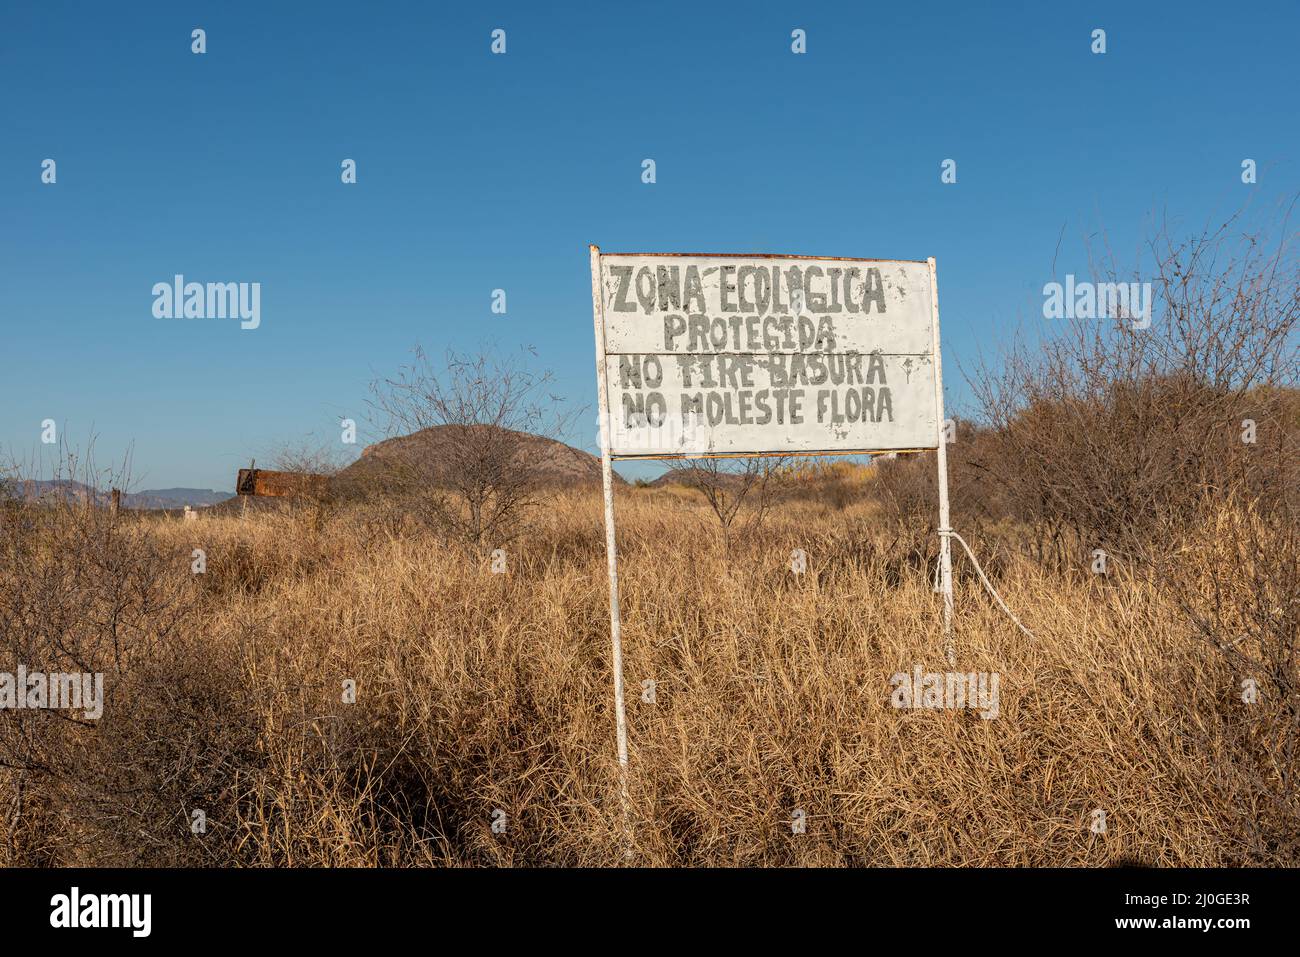 Sign written in Spanish translates into Protected Ecological Zone, Don't Throw Trash, and Do Not Disturb Plants, San Carlos, Sonora, Mexico. Stock Photo